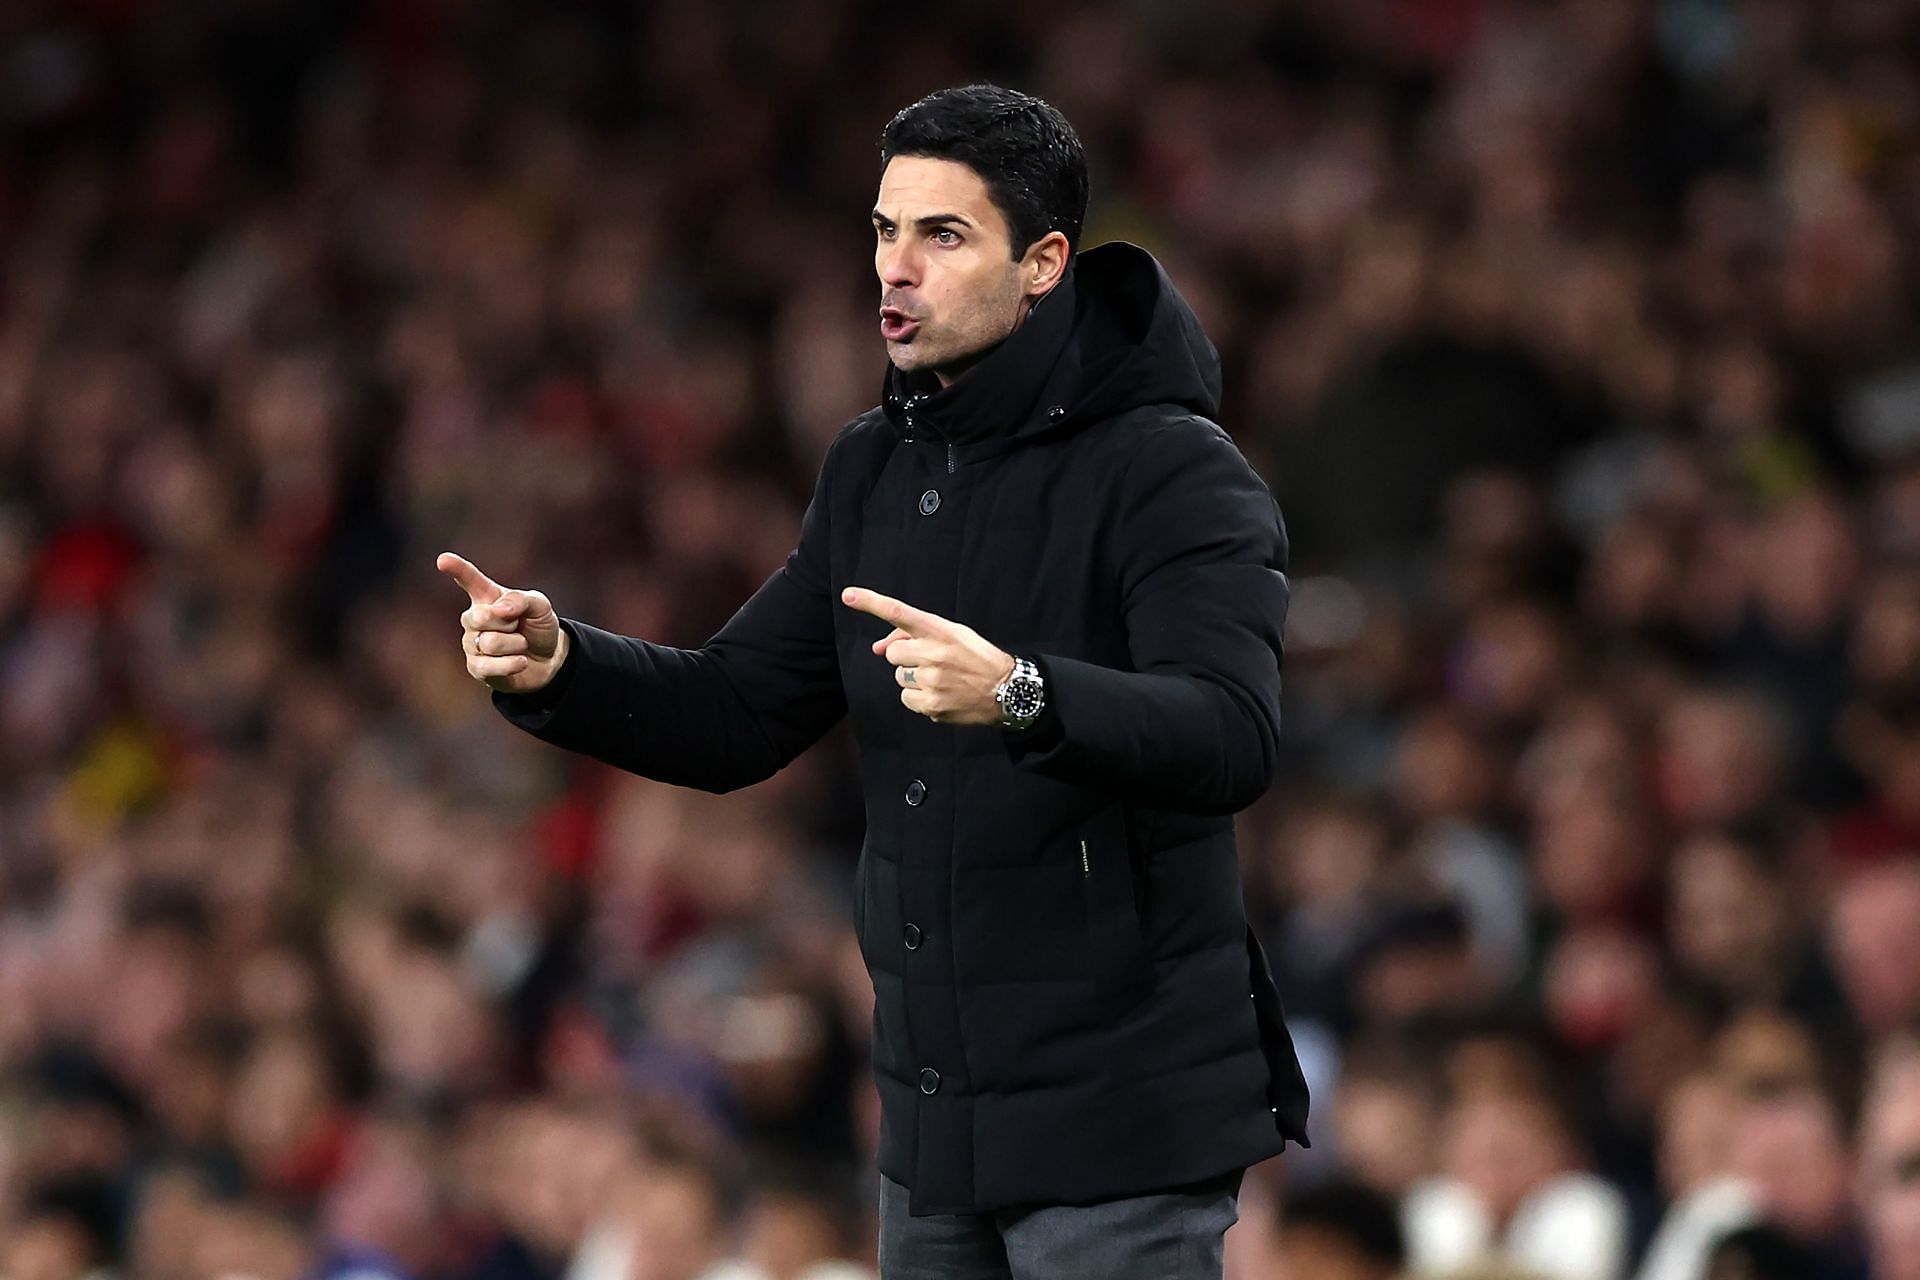 Arteta wants to see an improvement from his men following Sporting draw.